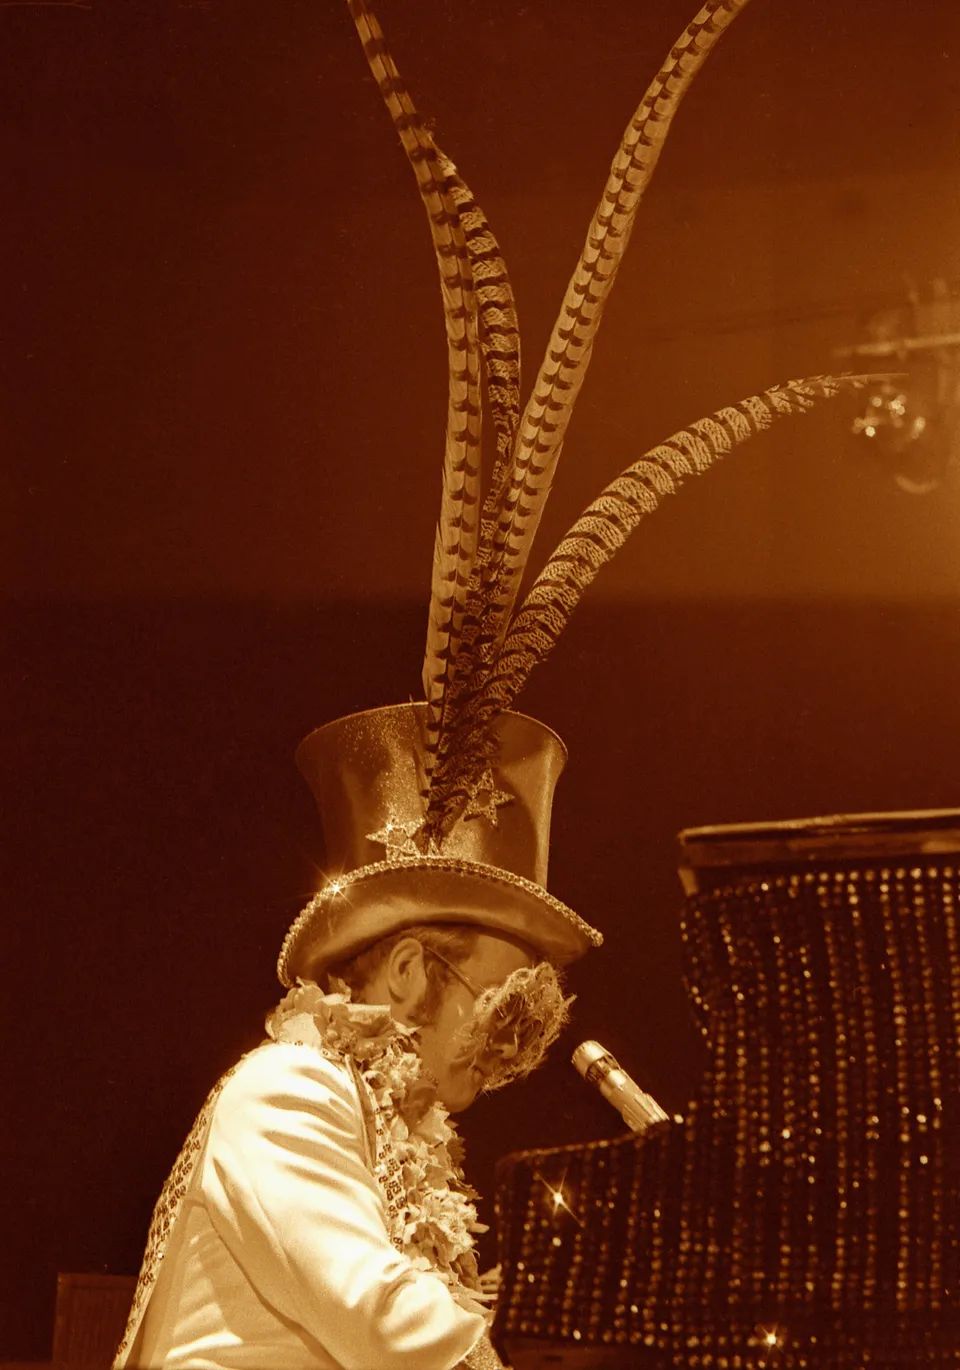 John performs onstage in a feathered hat, 1974